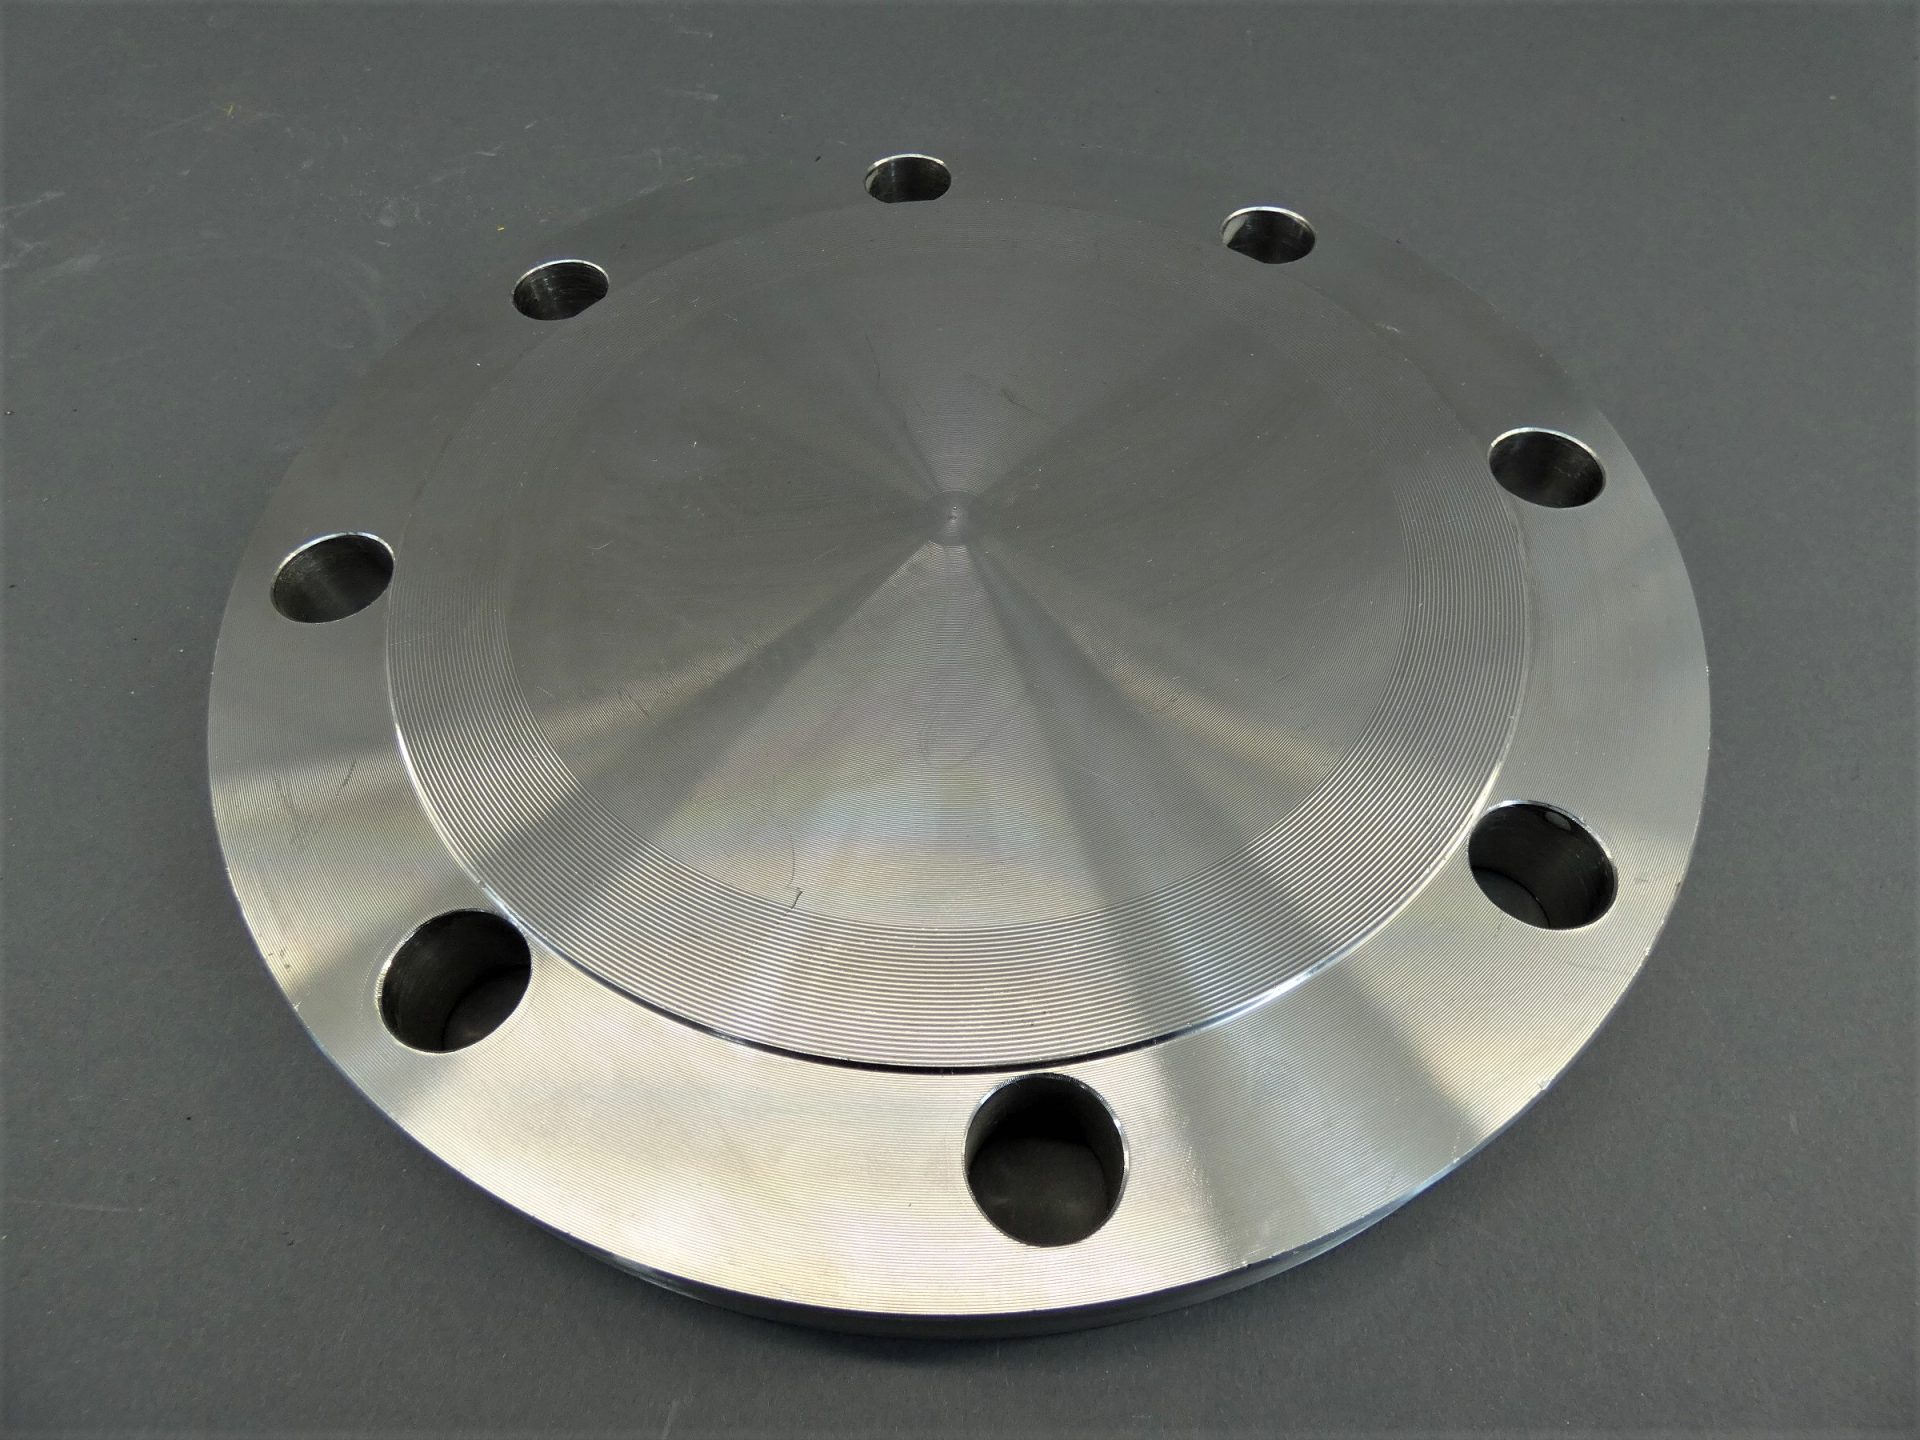 6″ Ansi Blind Flange B165 A182 Raised Face Rf Stainless Steel 150 316316l Ss Gpm Surplus 5930